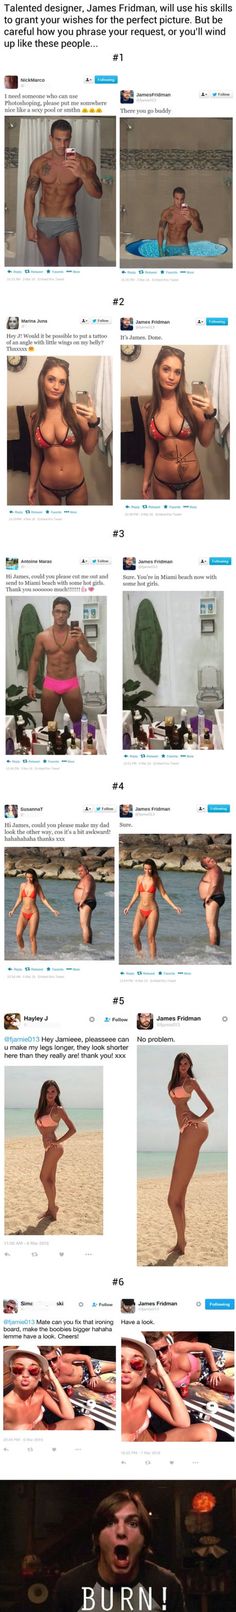 Graphic designer trolls people who ask for their pics to be Photoshopped in the???